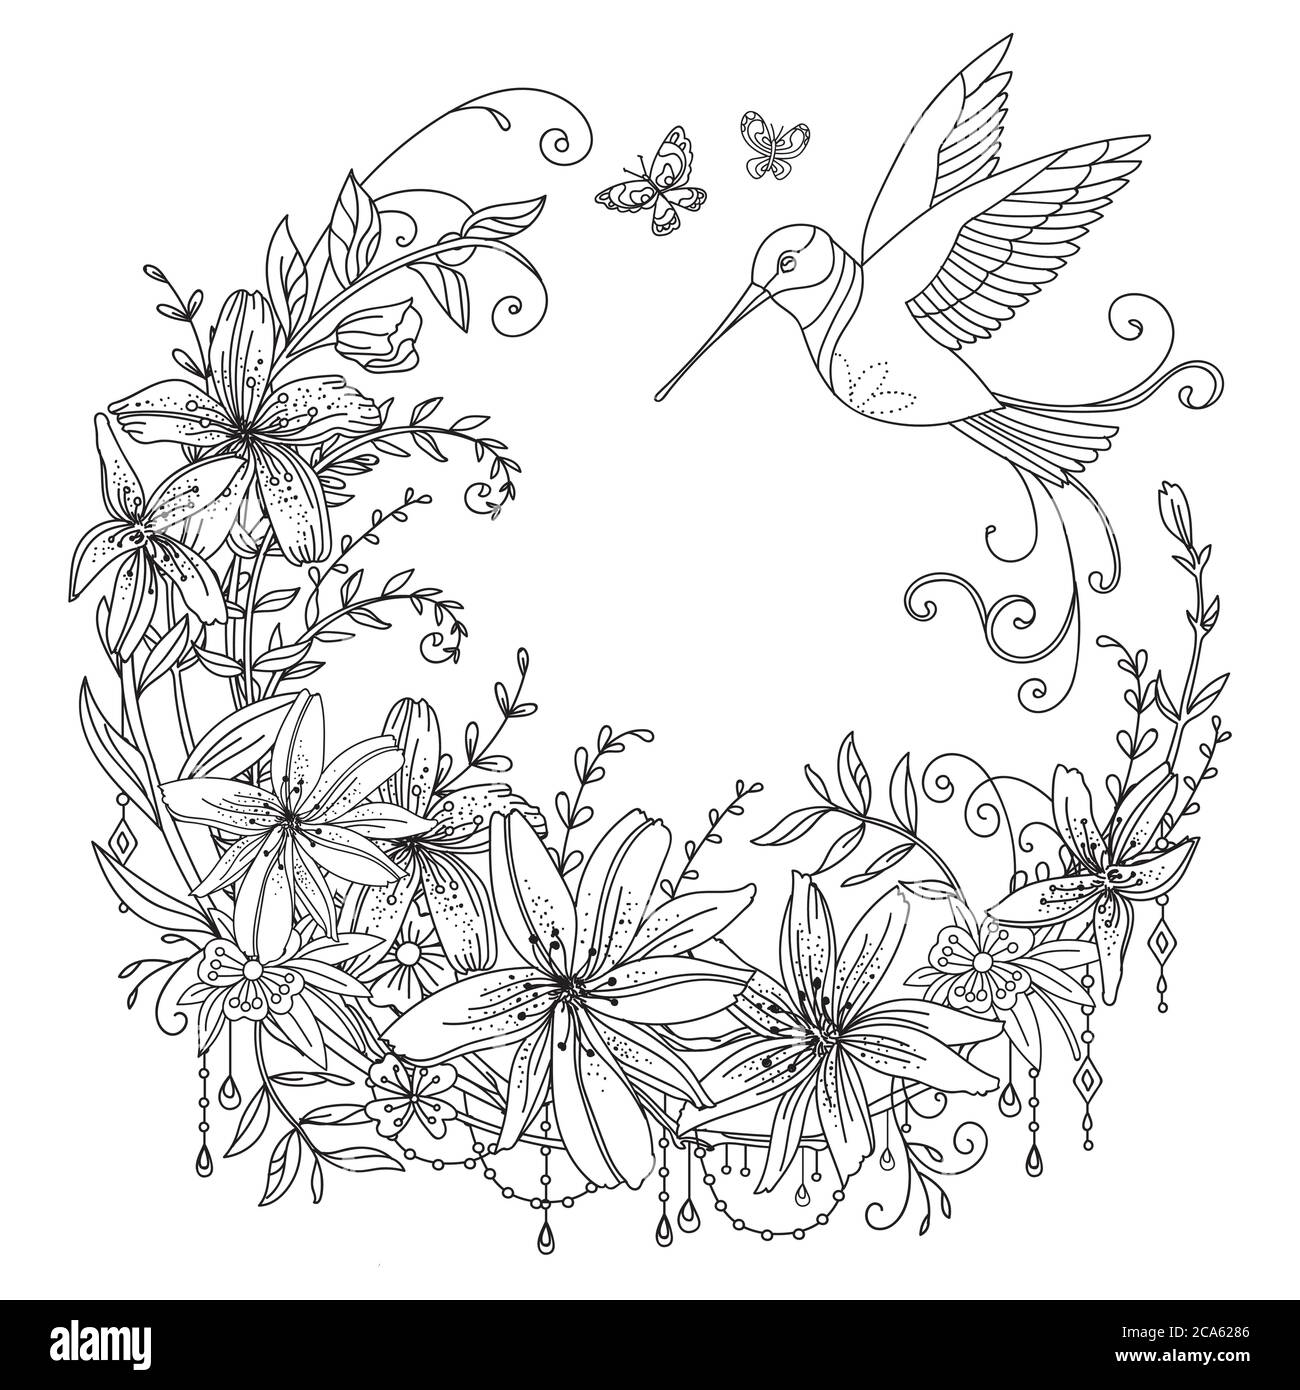 Vector coloring ornamental wreth with hummingbird and flowers in circle composition. Decorative illustration black contour drawing isolated on white. Stock Vector